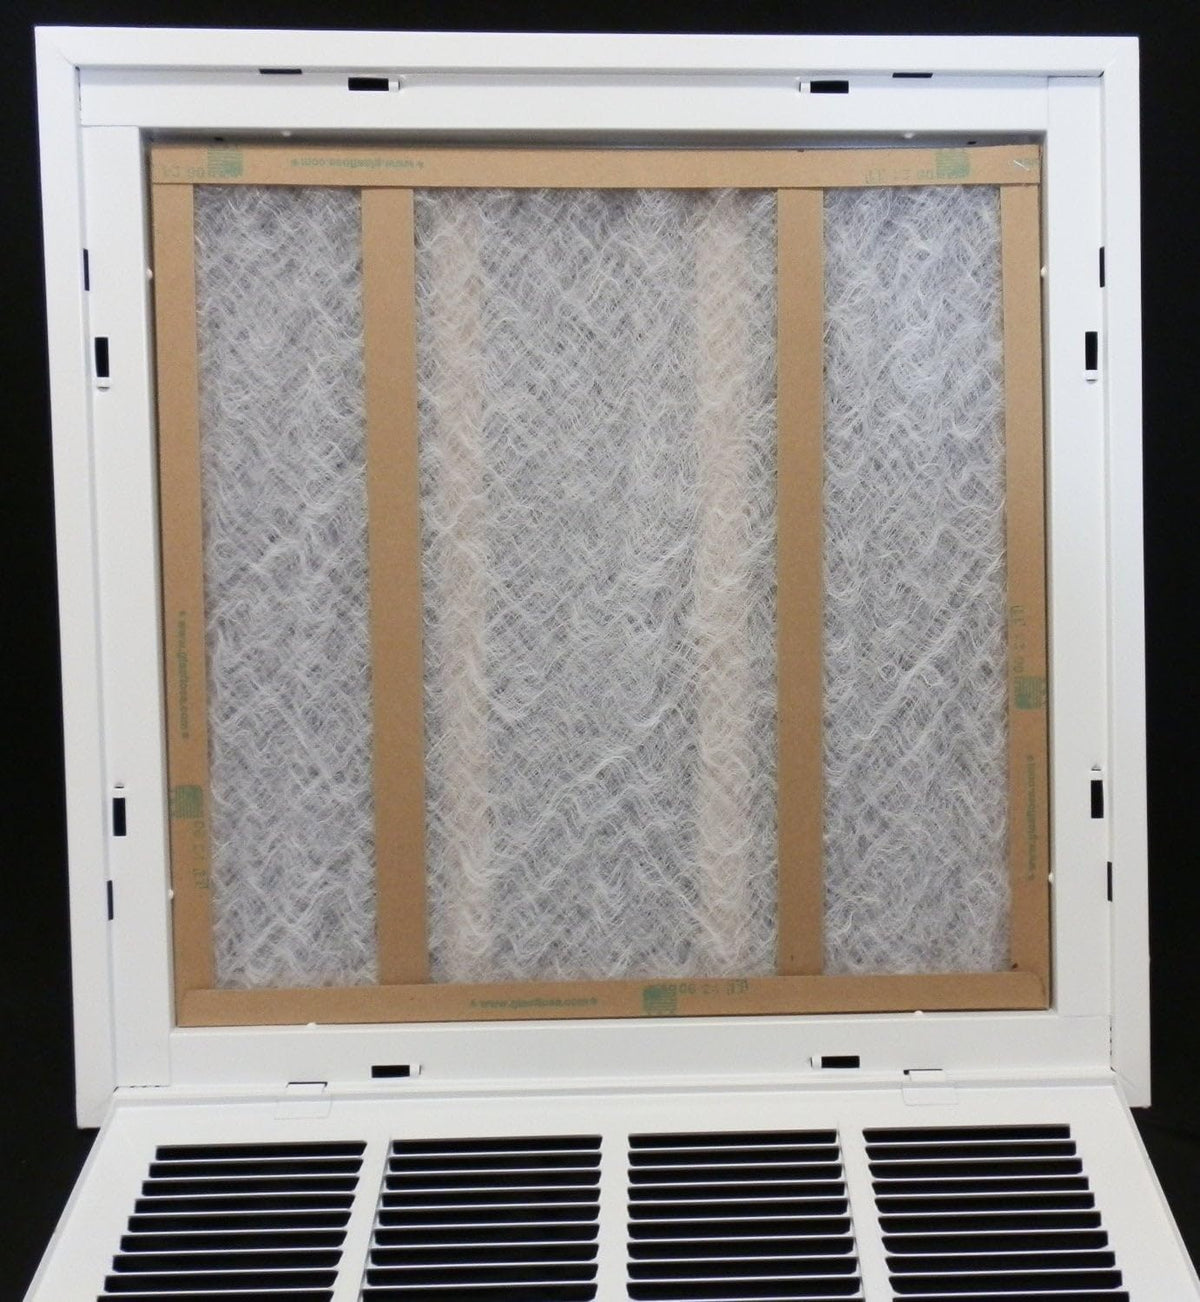 36&quot; X 10&quot; Steel Return Air Filter Grille for 1&quot; Filter - Removable Frame - [Outer Dimensions: 38 5/8&quot; X 12 5/8&quot;]